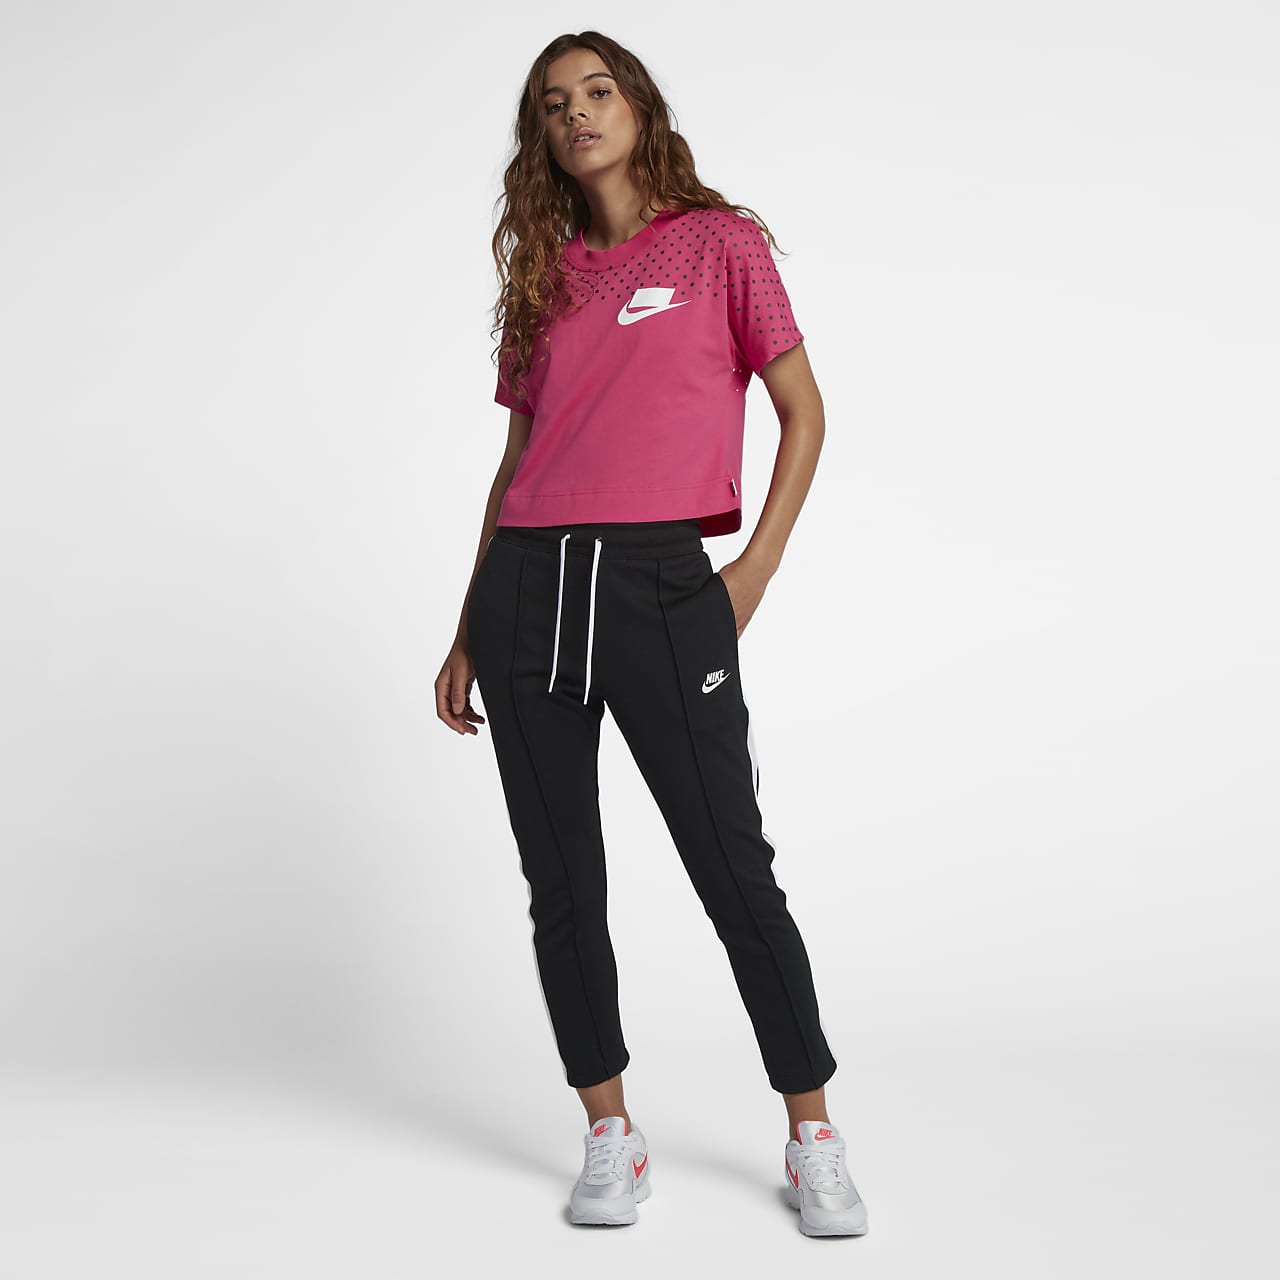 https://static.nike.com/a/images/t_PDP_1280_v1/f_auto,q_auto:eco/nnvb8dmxwcsnaziwhkyd/sportswear-crop-top-5dh69B.png